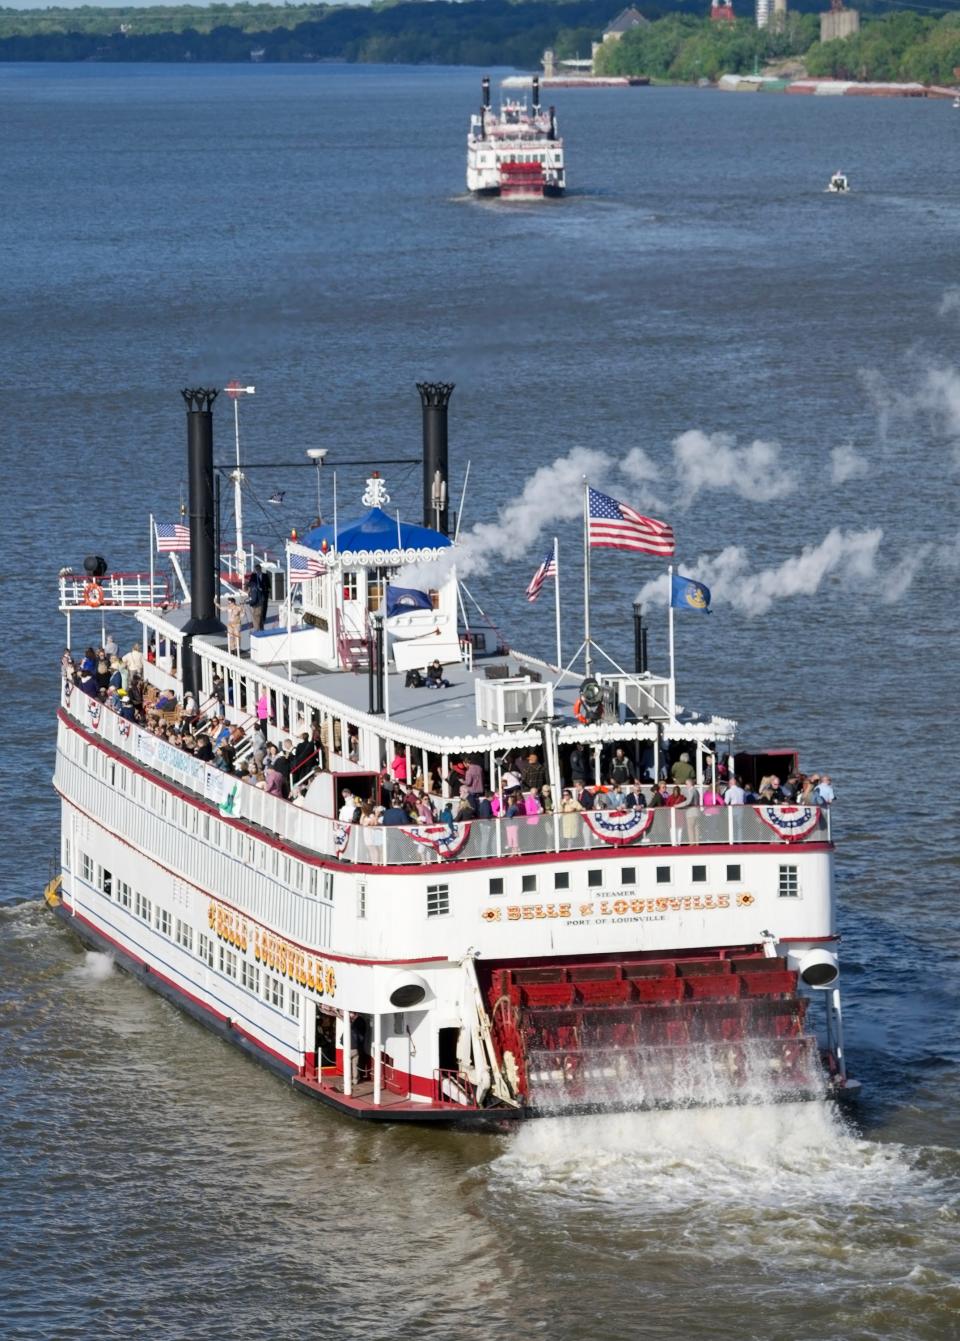 The Belle of Louisville heads chases the Belle of Cincinnati upriver at the start of the Kentucky Derby Festival Great Steamboat Race on Wednesday, May 3, 2023